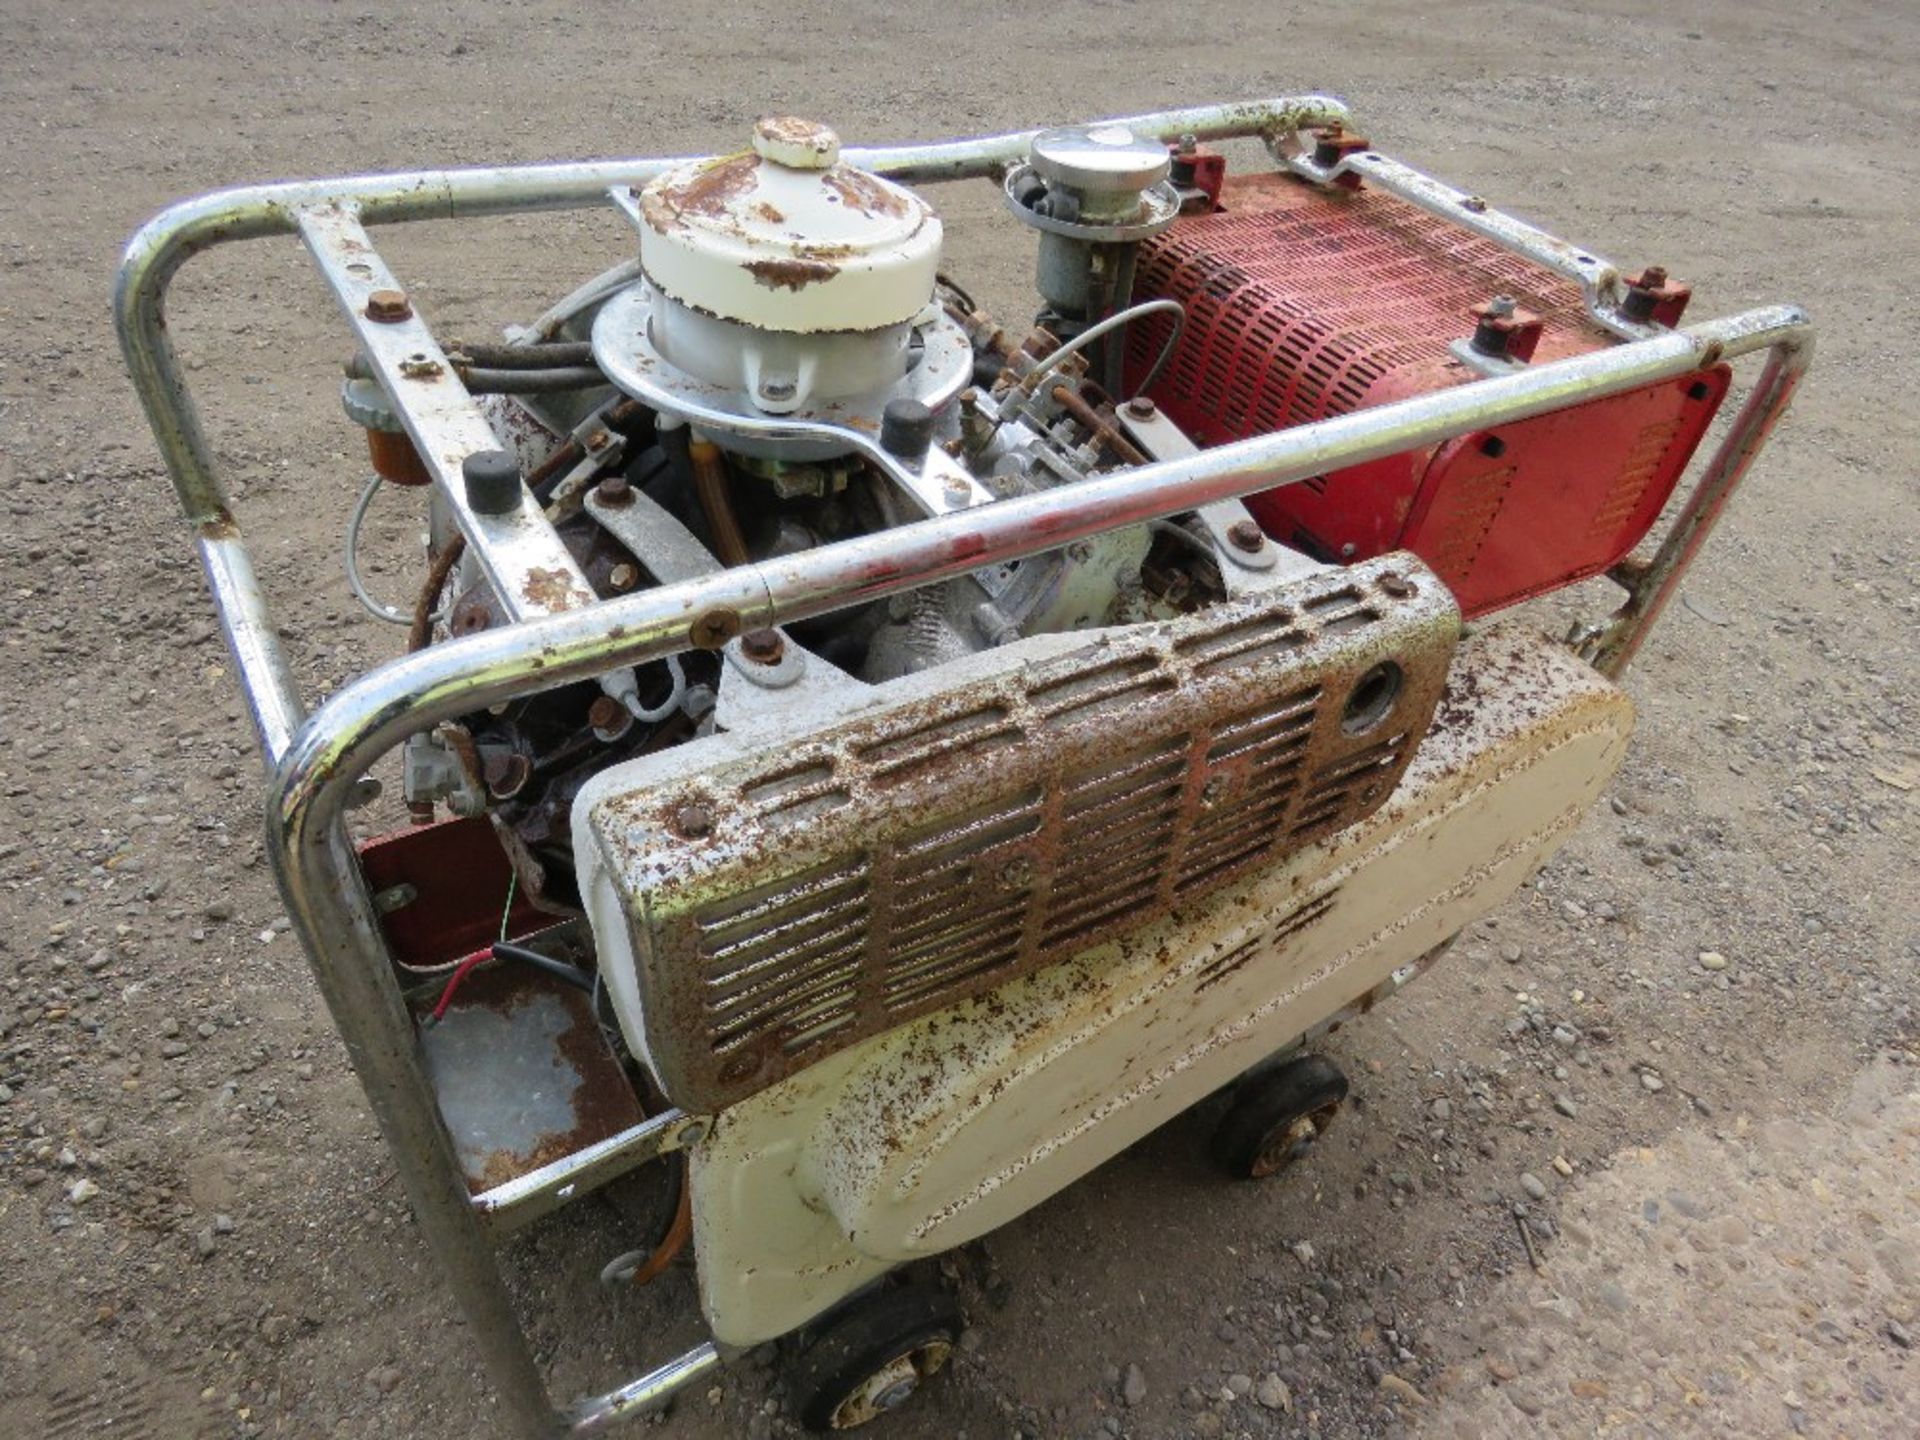 DIESEL ENGINED ELECTRIC START GENERATOR. - Image 6 of 6